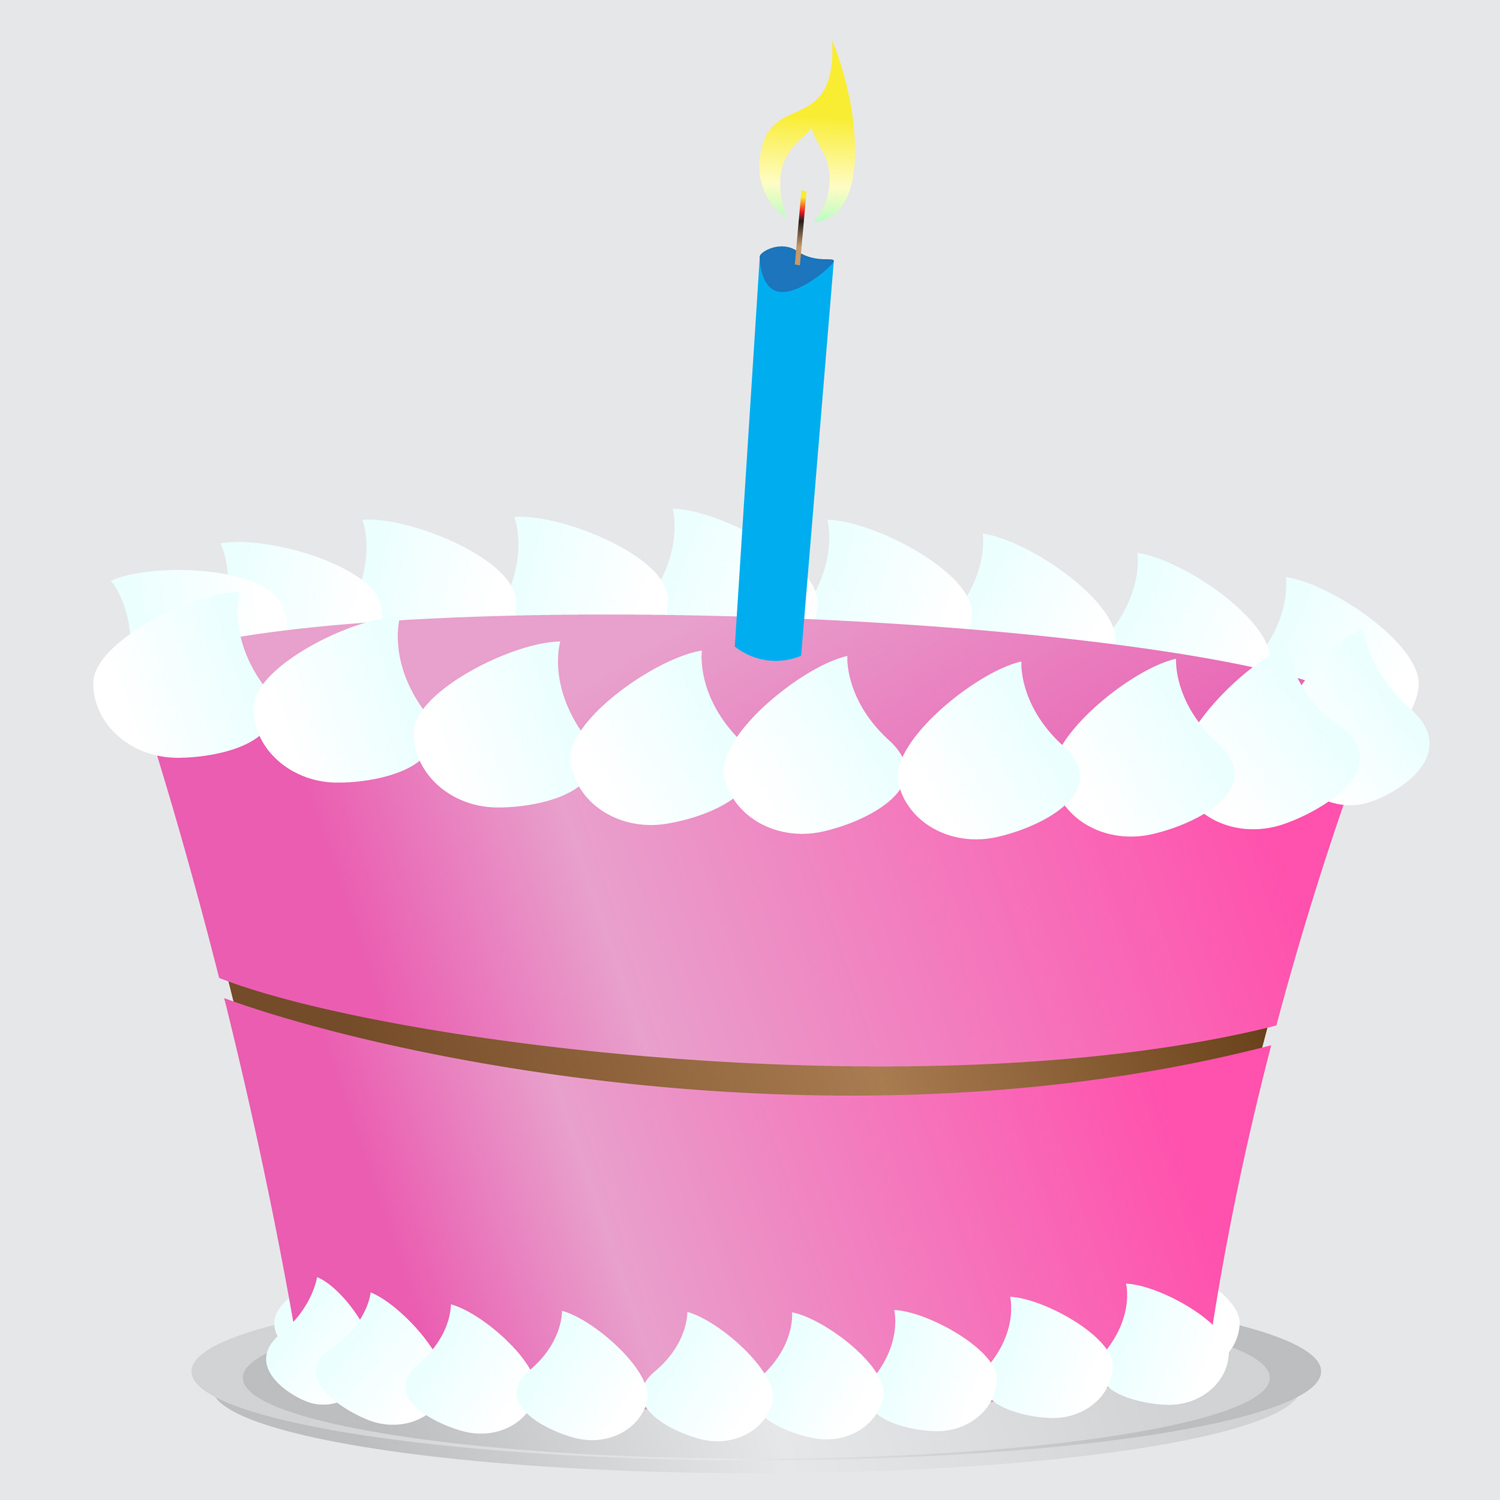 Free Cake Vector, Download Free Clip Art, Free Clip Art on